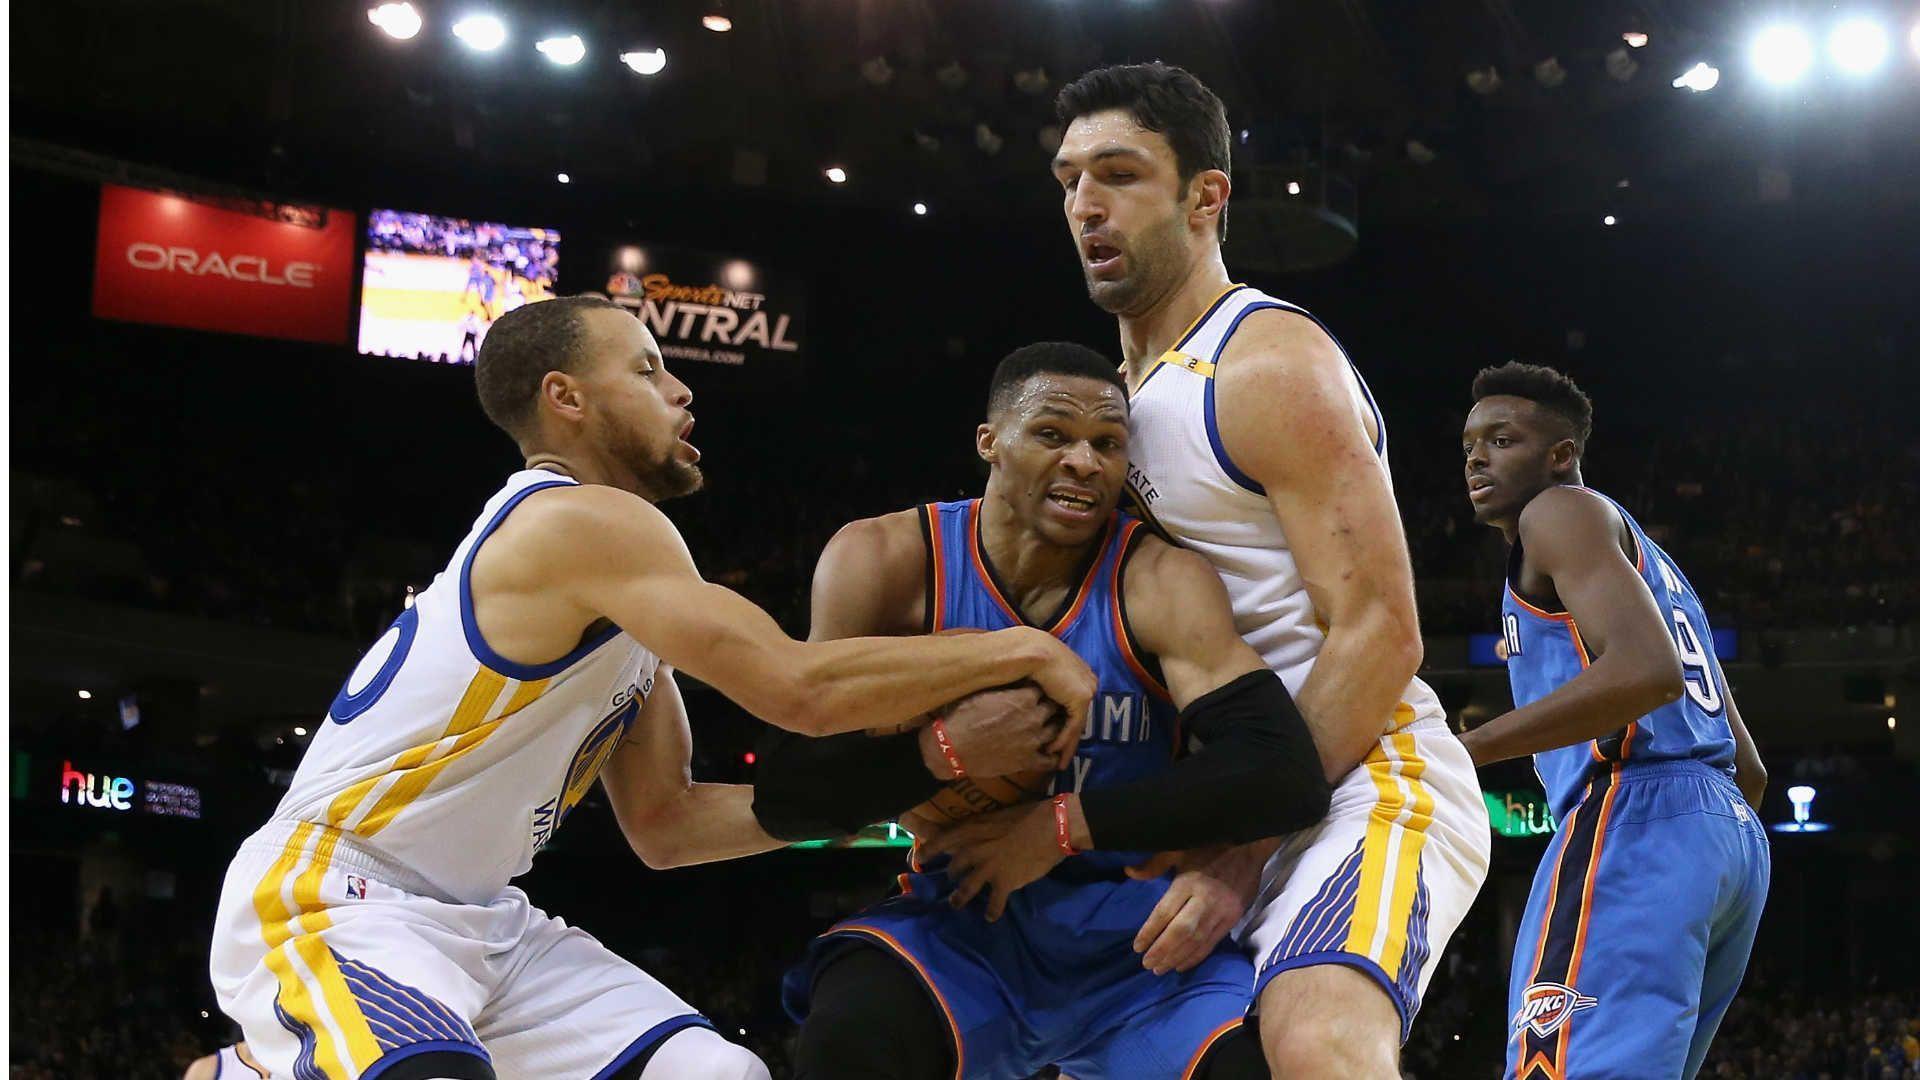 NBA To Review Zaza Pachulia Russell Westbrook Incident, Report